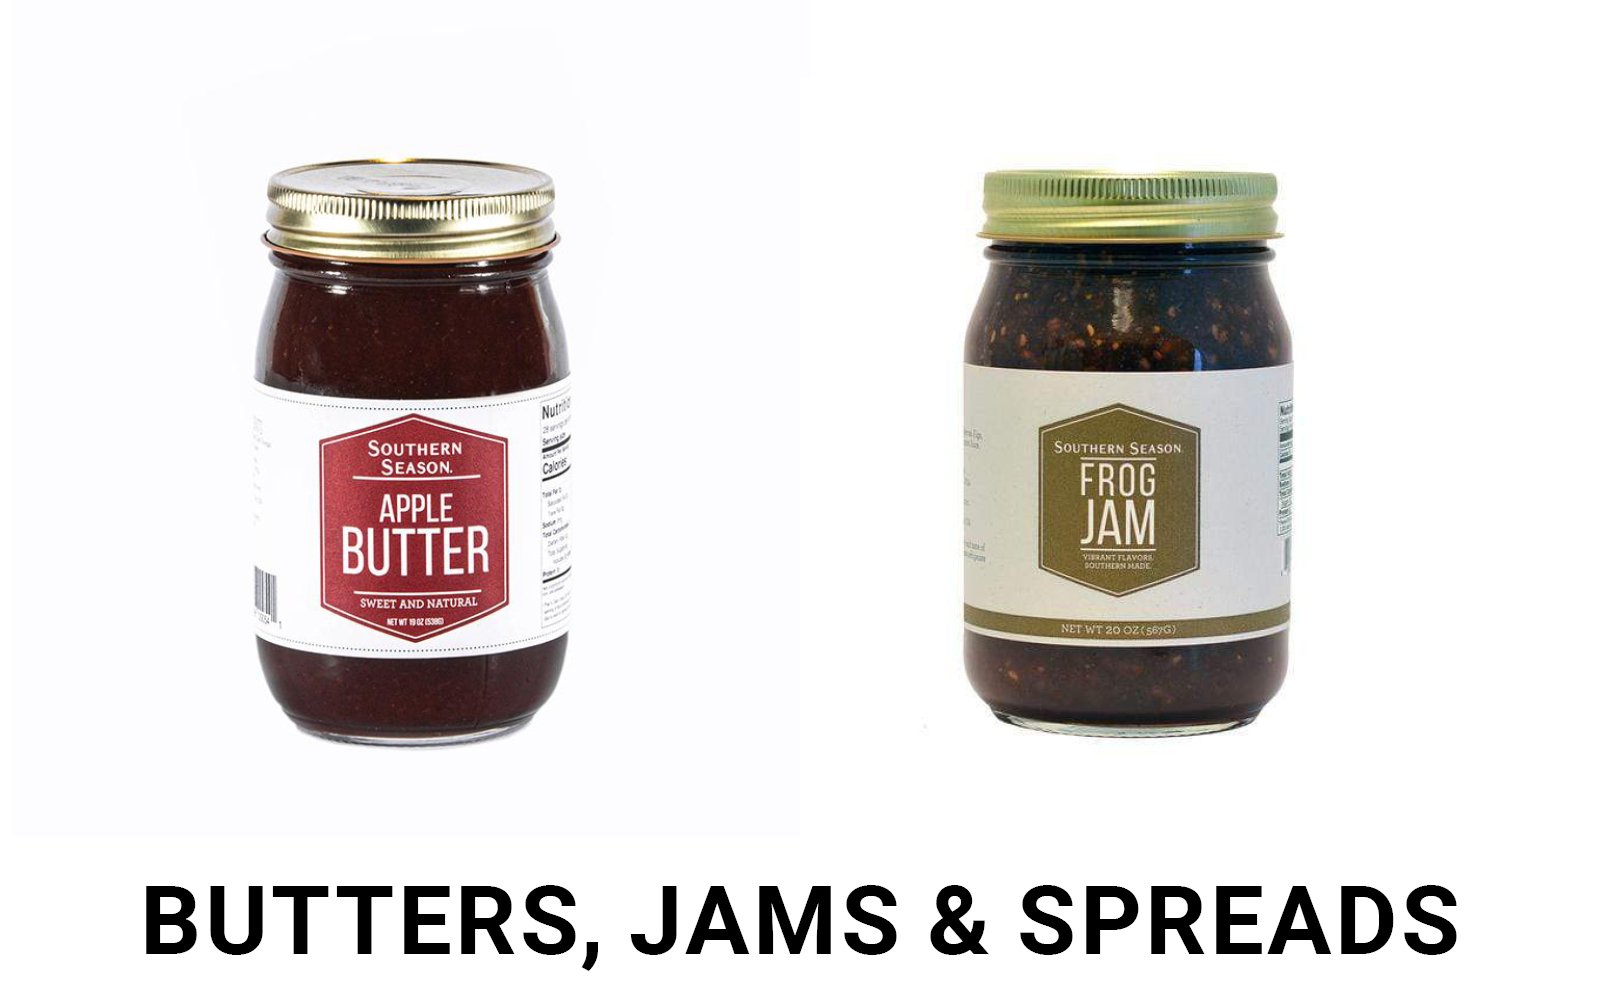 Butters, Jams & Spreads